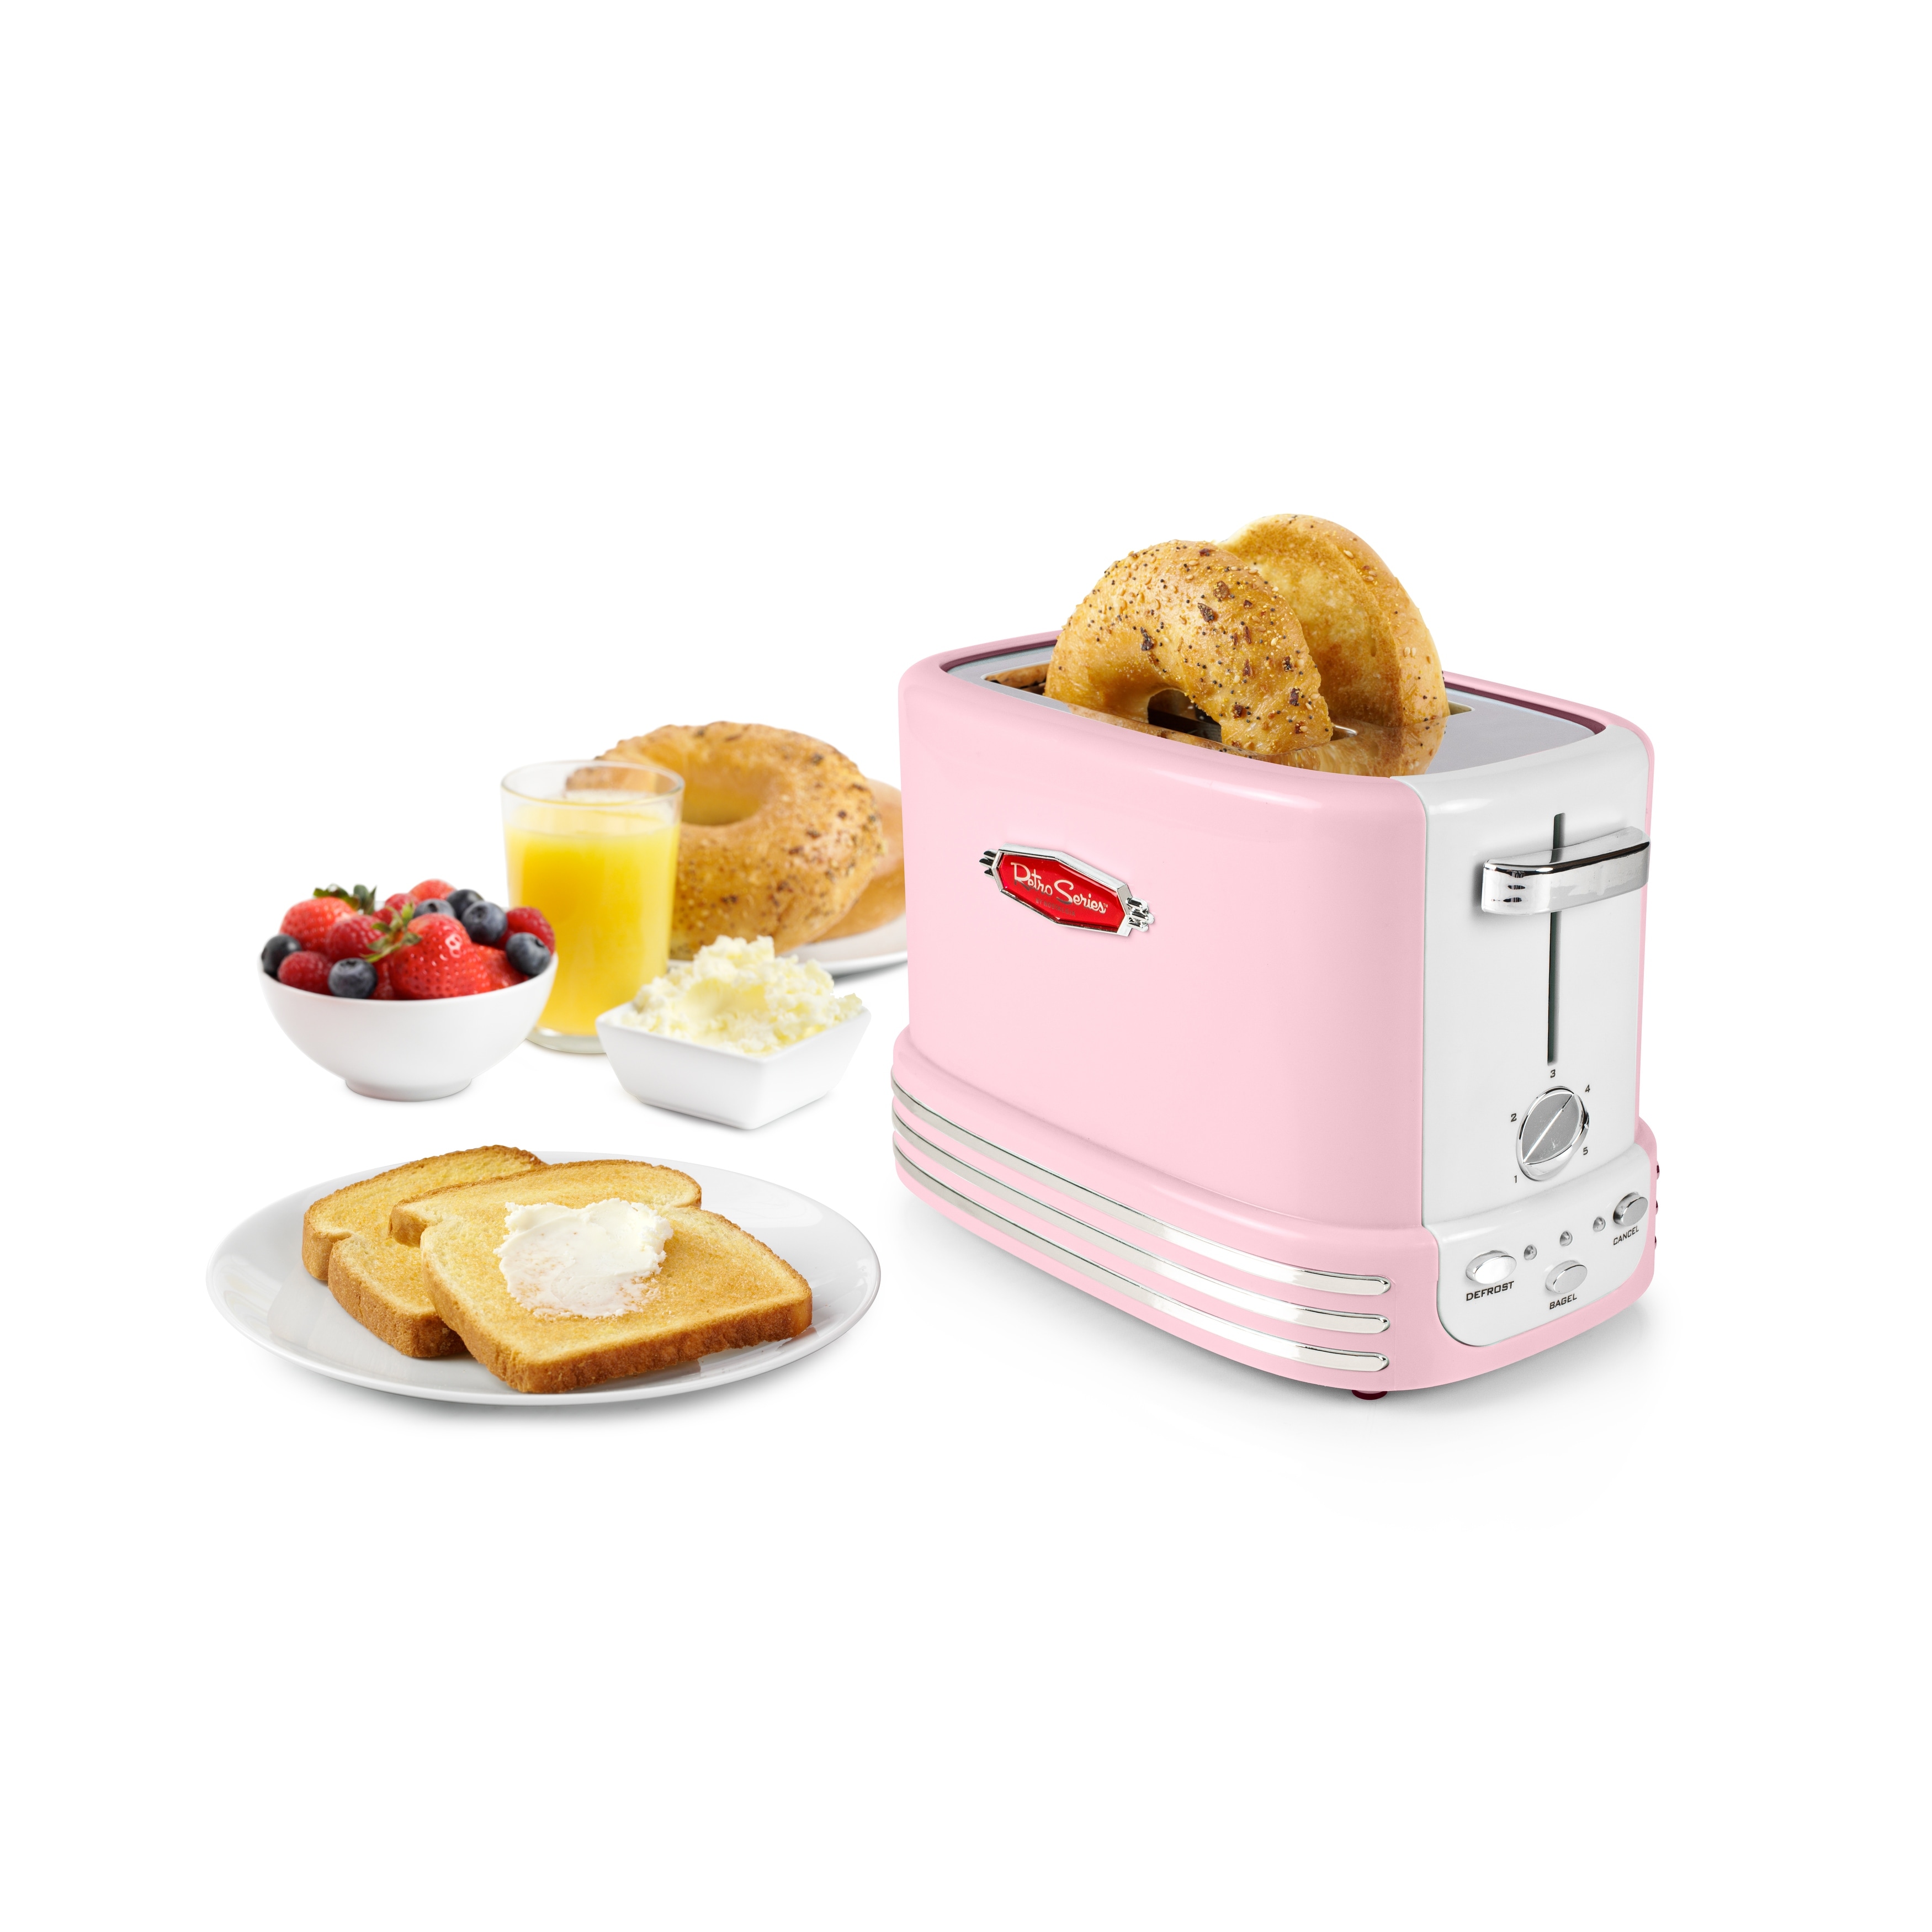 https://ak1.ostkcdn.com/images/products/is/images/direct/1d94c964e2469242f3a77117df9213b54b21bb11/Nostalgia-Retro-2-Slice-Bagel-Toaster.jpg